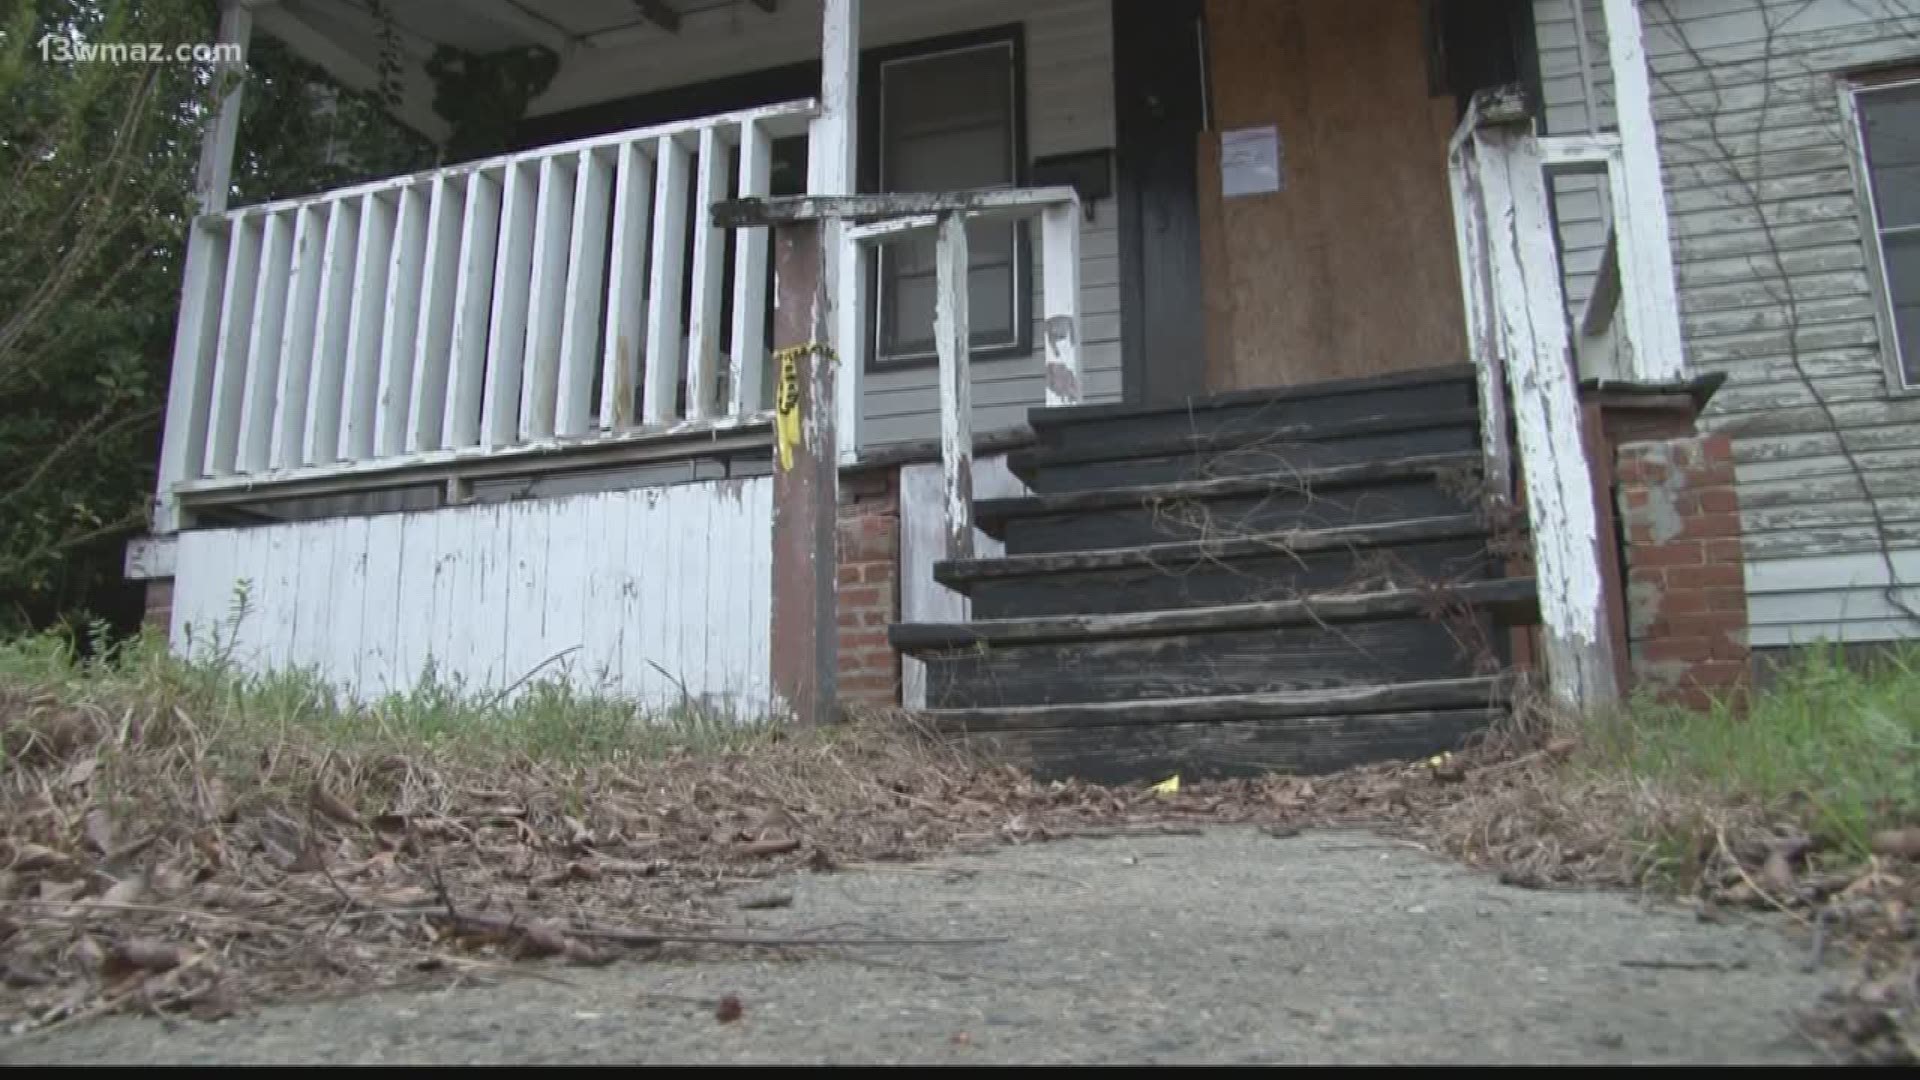 Bibb commission trying to fix blight issue